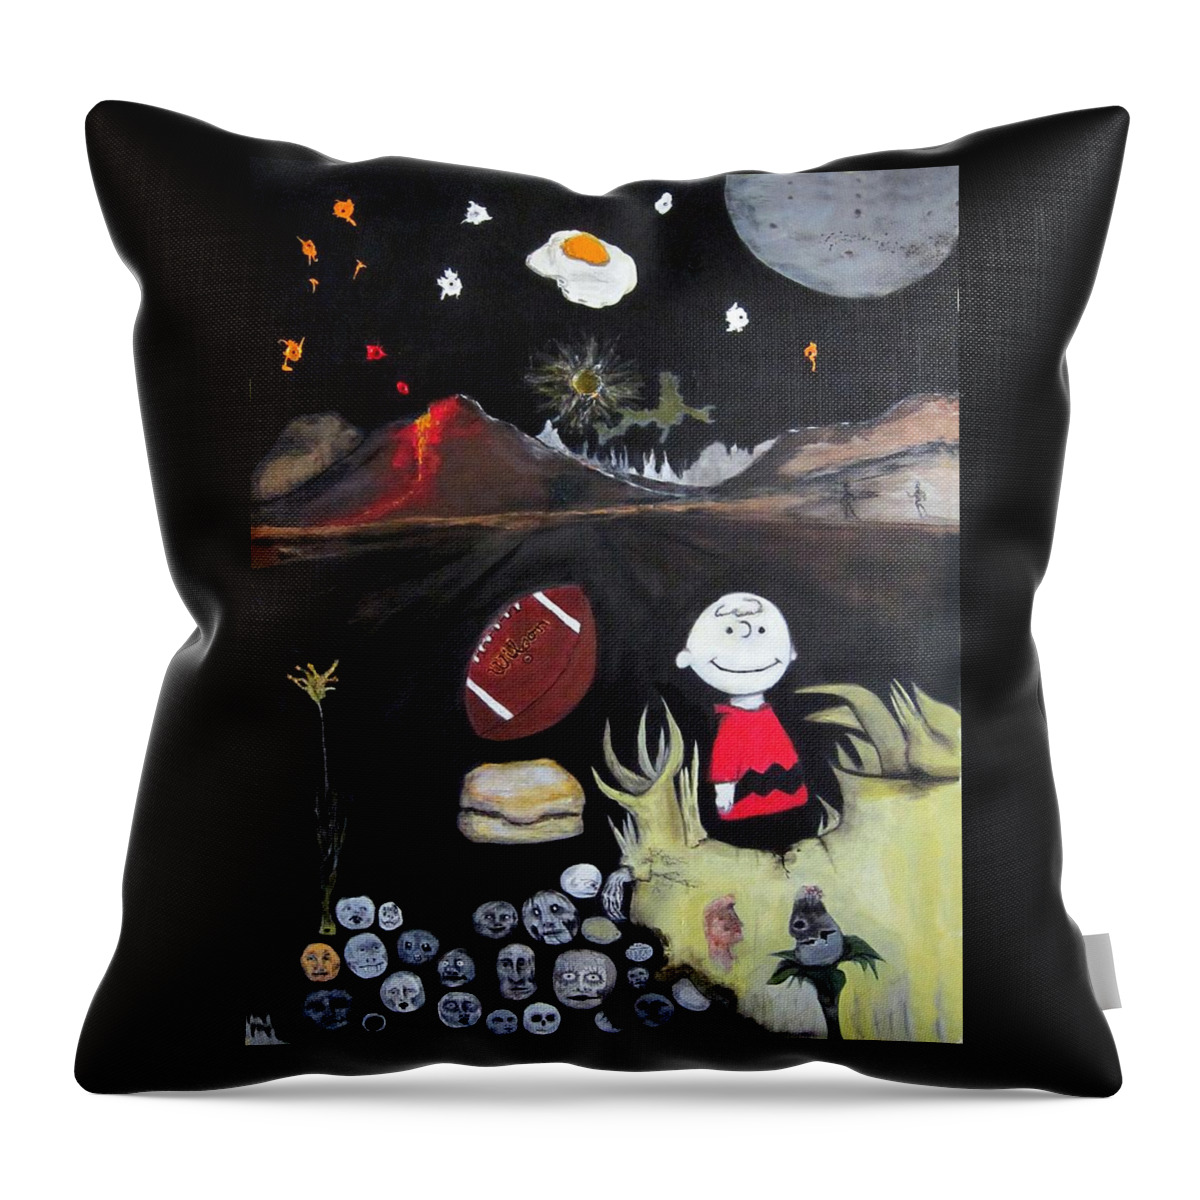 Epic Throw Pillow featuring the painting Epic by Dan Twyman